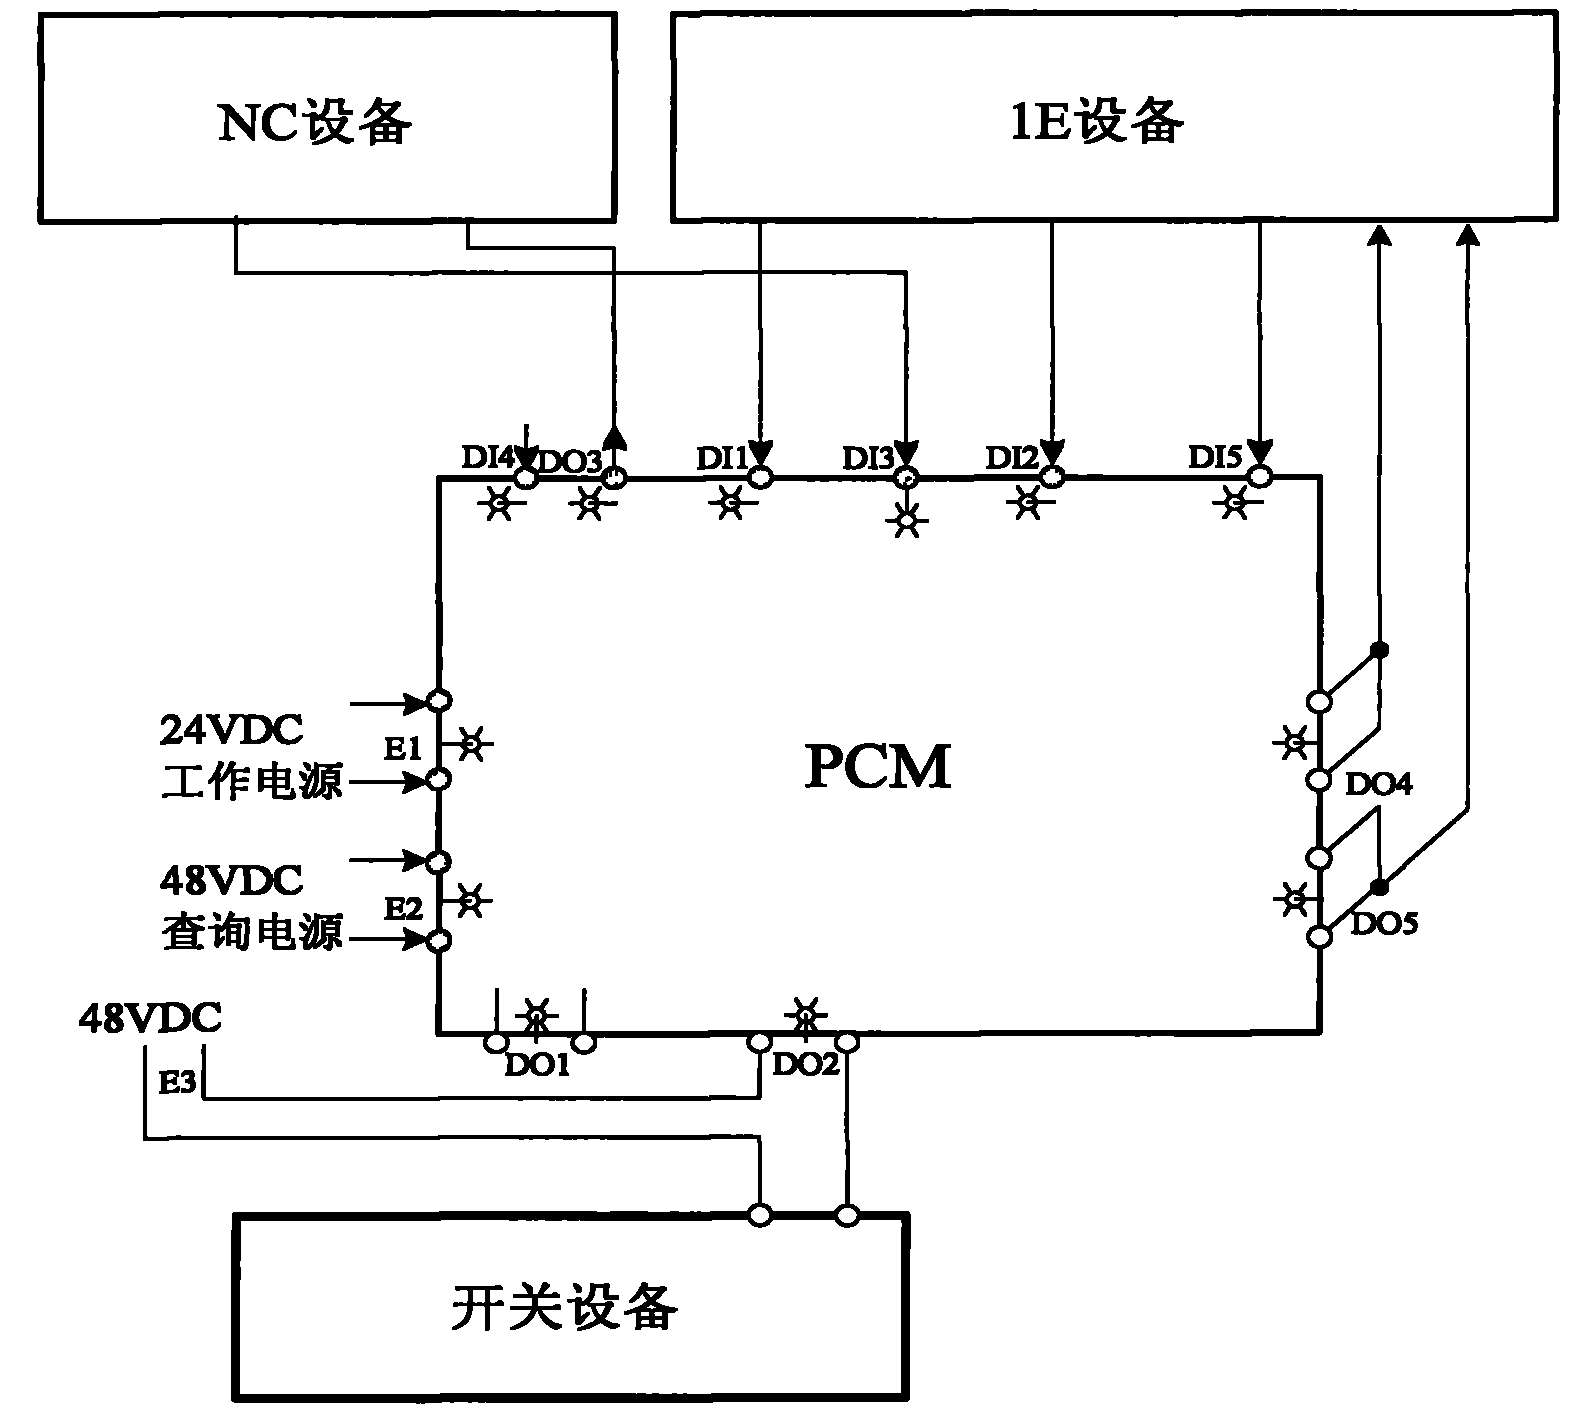 Relay module with priority control function